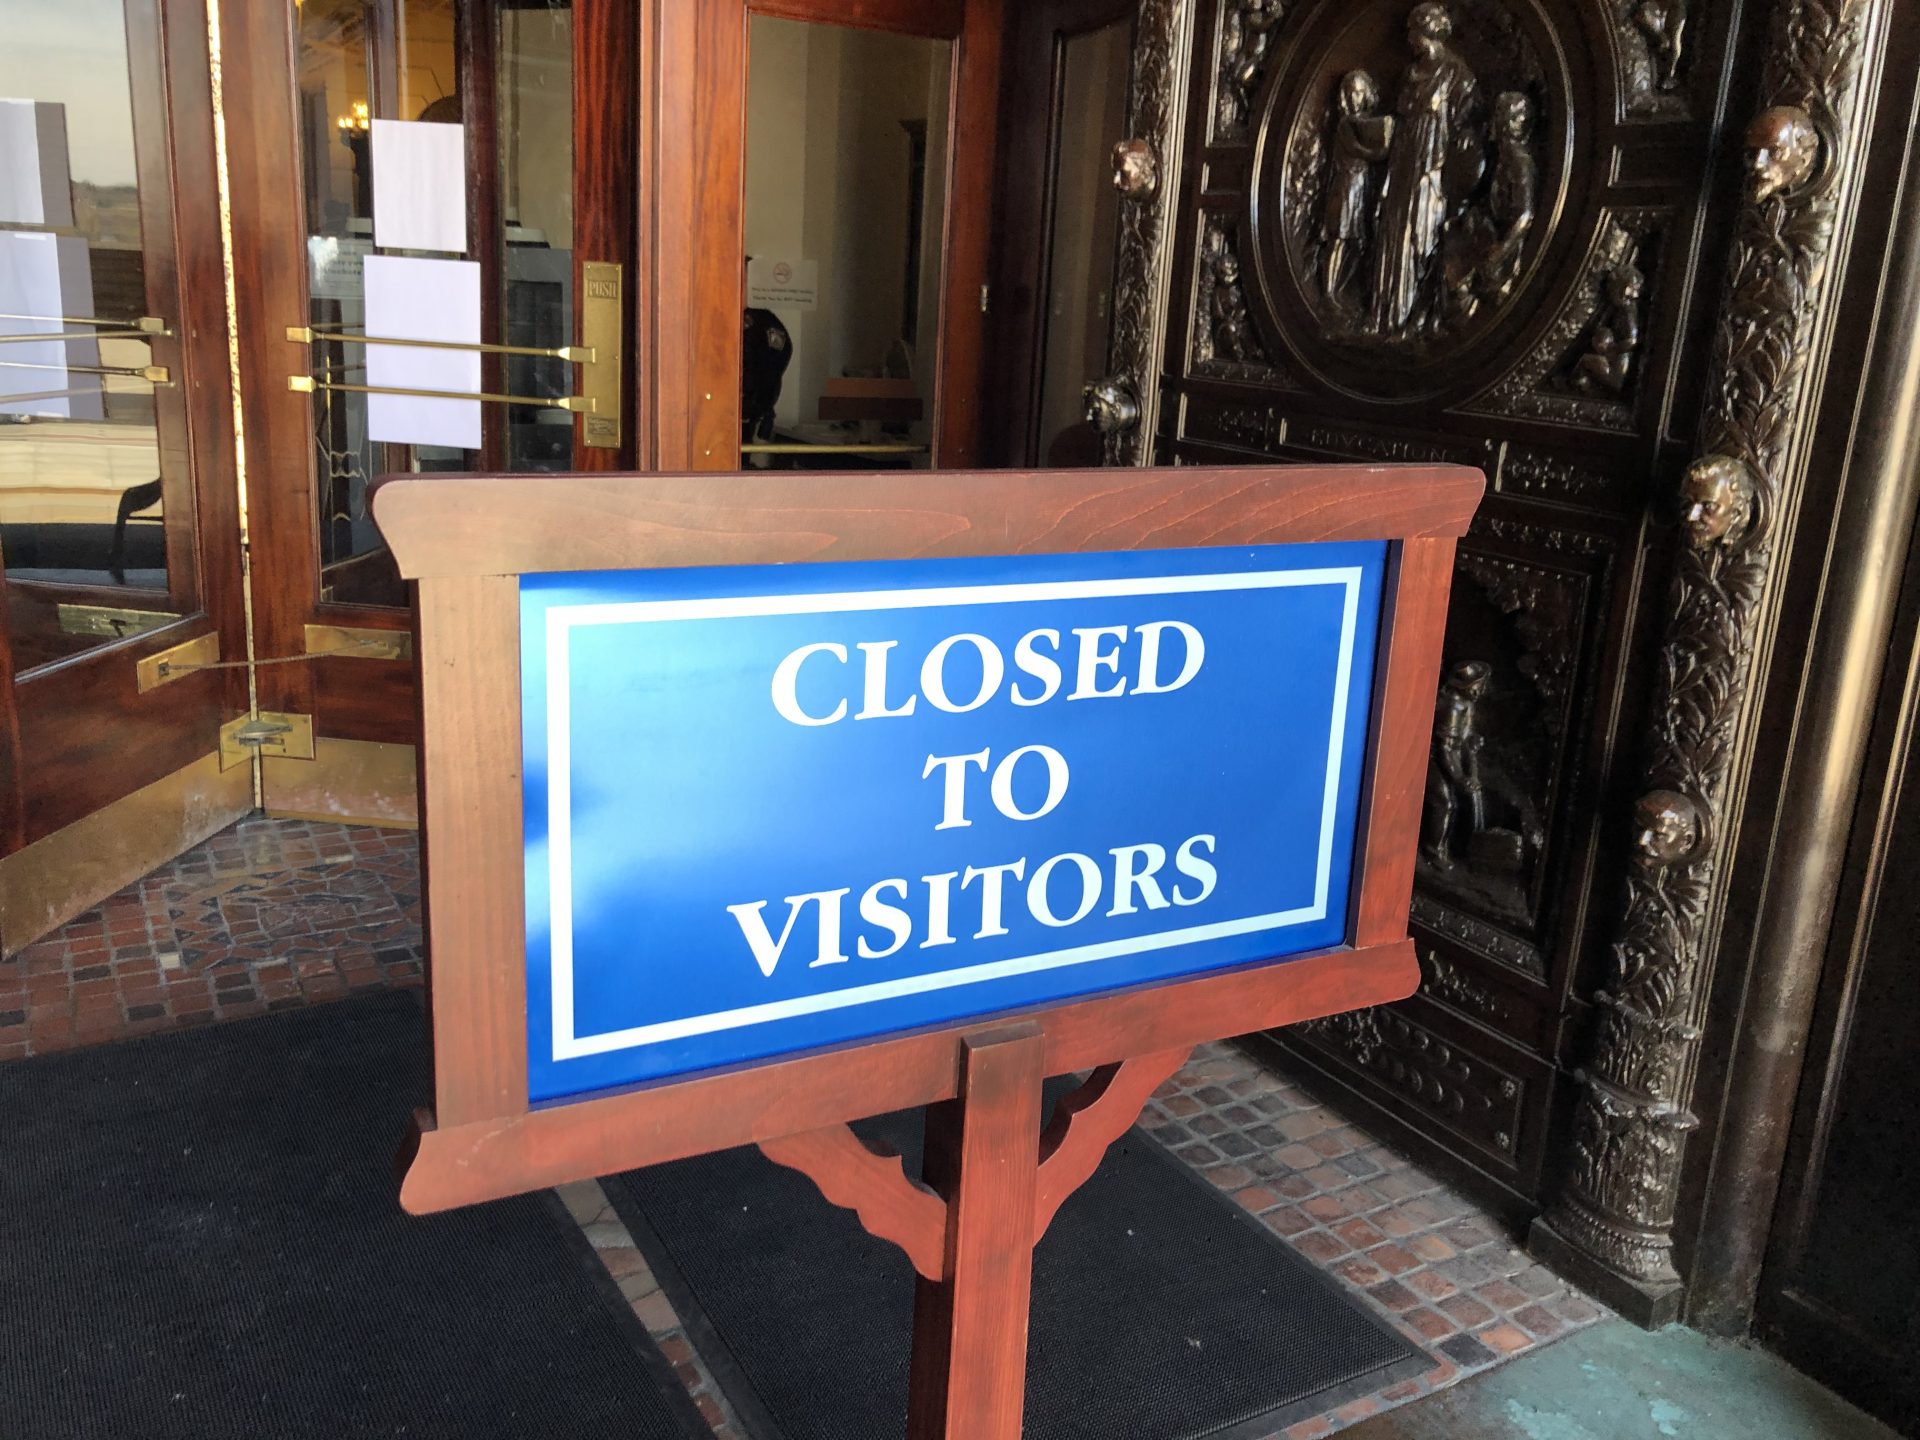 Closed to visitors